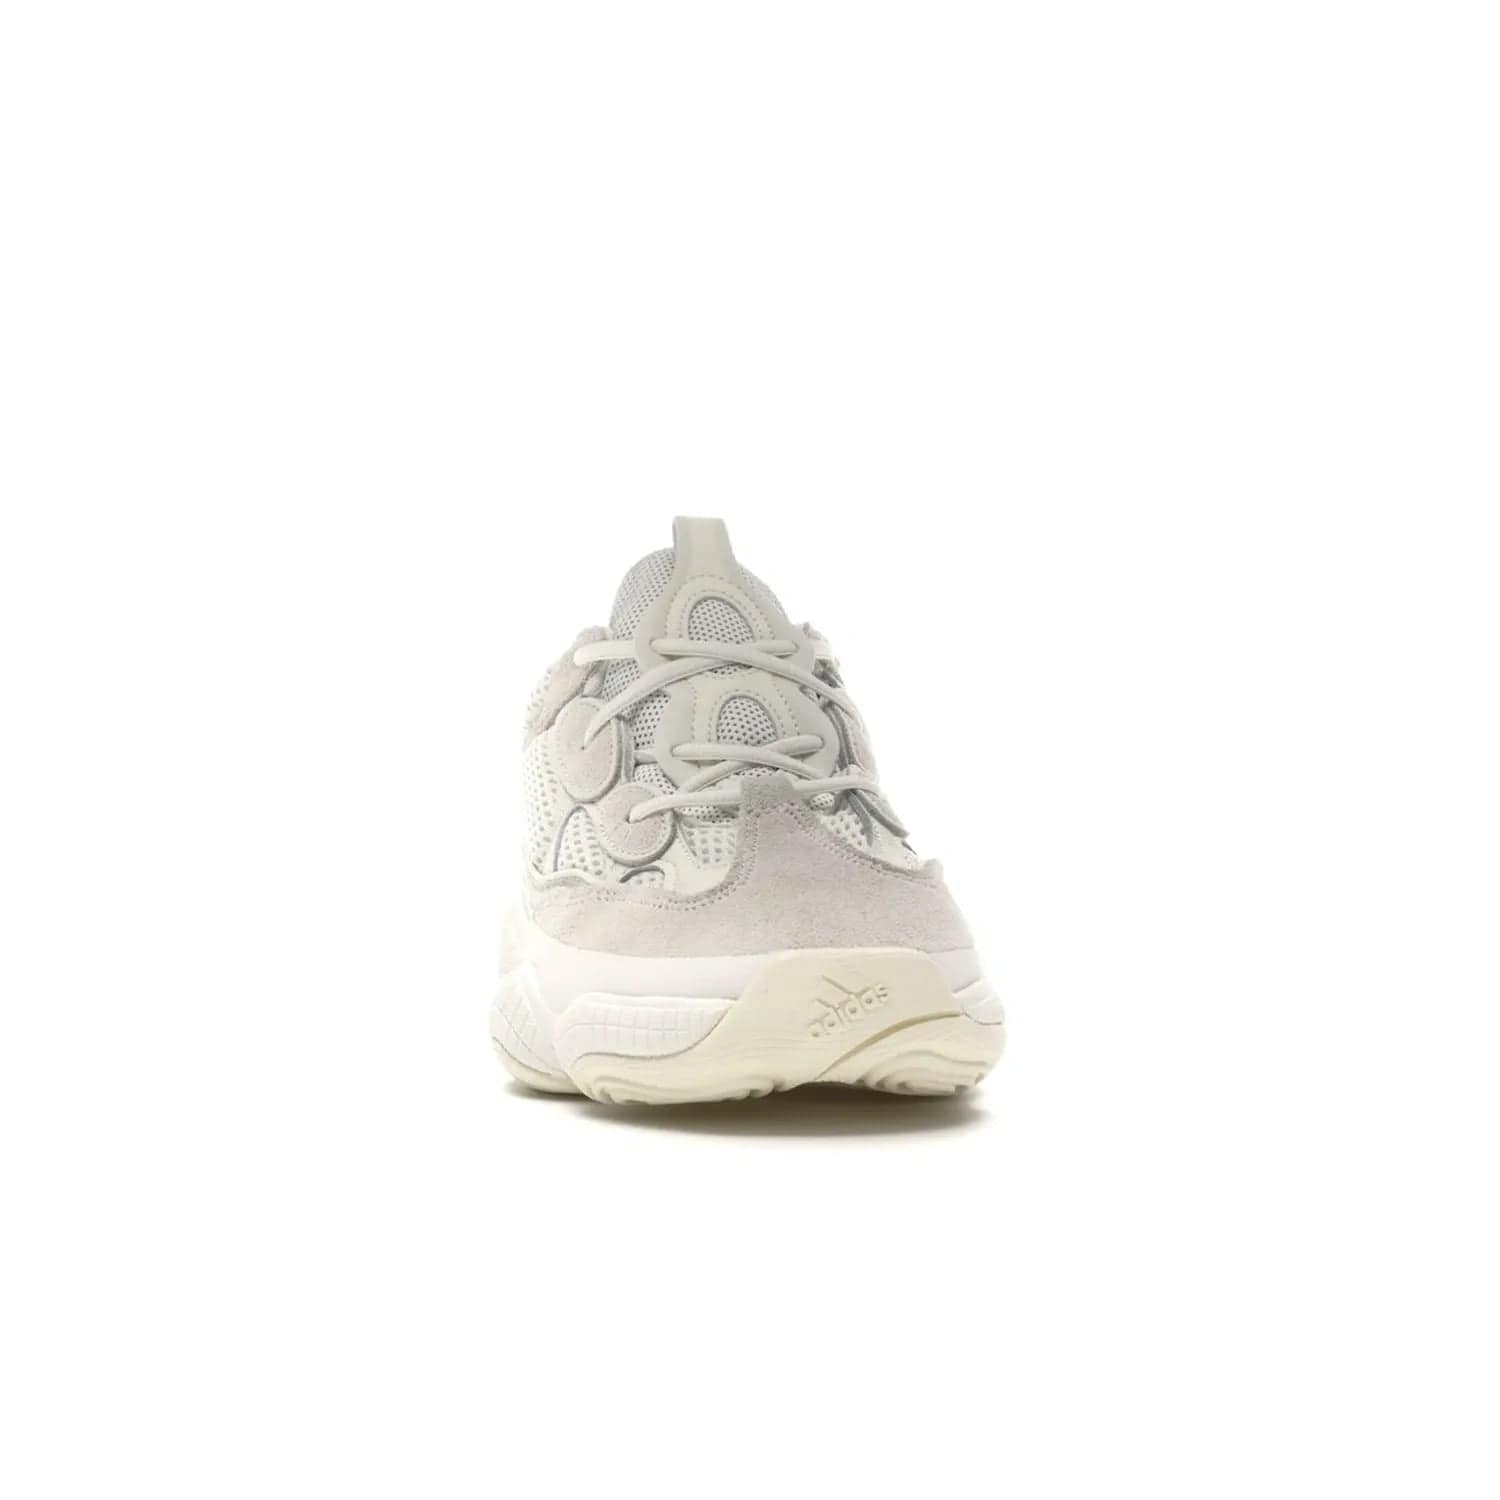 adidas Yeezy 500 Bone White - Image 9 - Only at www.BallersClubKickz.com - Classic look perfect for any sneaker collection. The adidas Yeezy 500 "Bone White" blends a white mesh upper with suede overlays & a chunky midsole inspired by the Adidas KB3. Complimented by a tonal-cream outsole, this timeless style is a must-have.